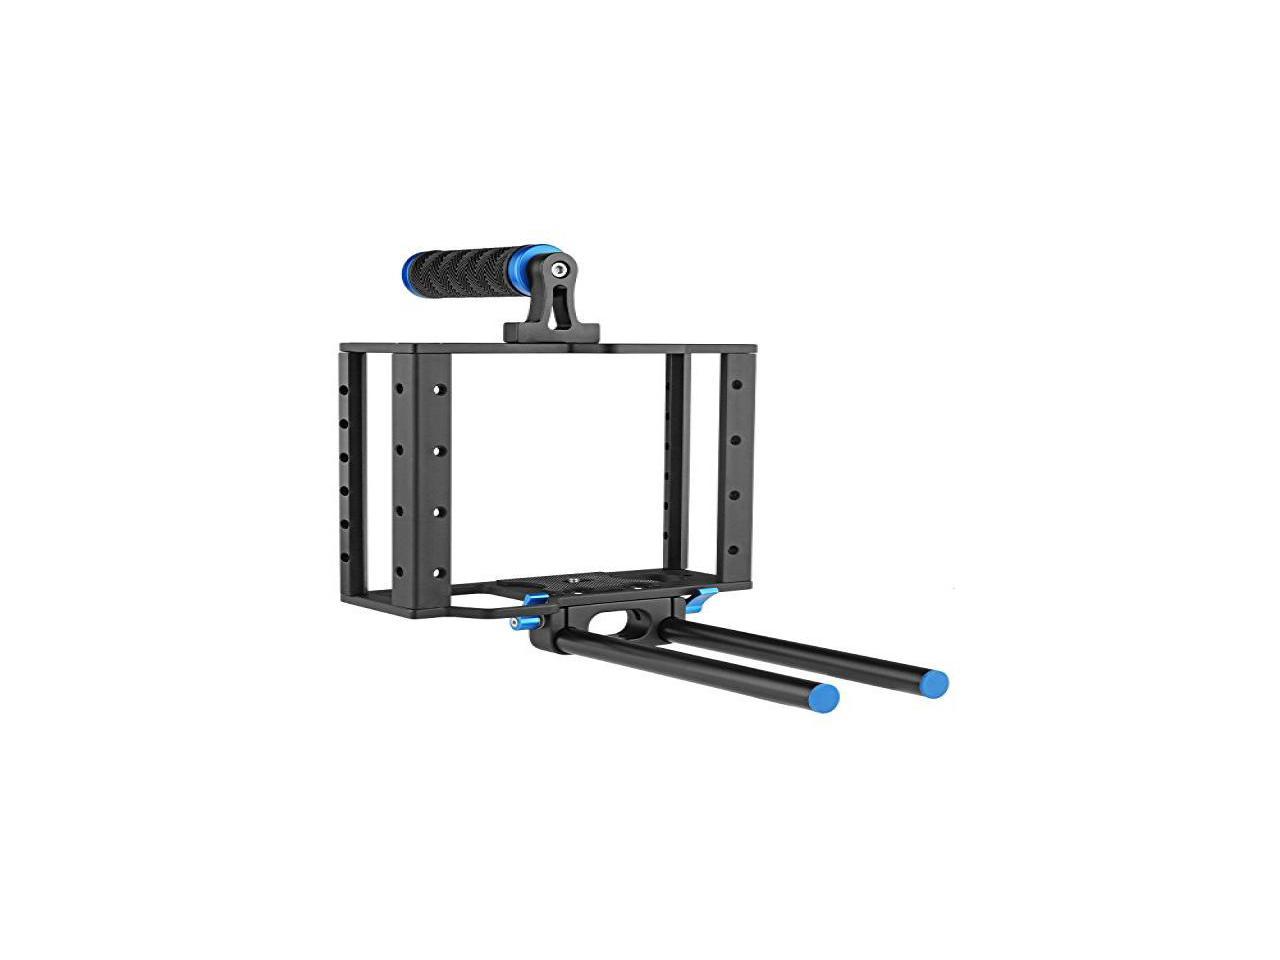 Opteka CXS-500 X-Cage Pro with Handgrip and Rail System for all 